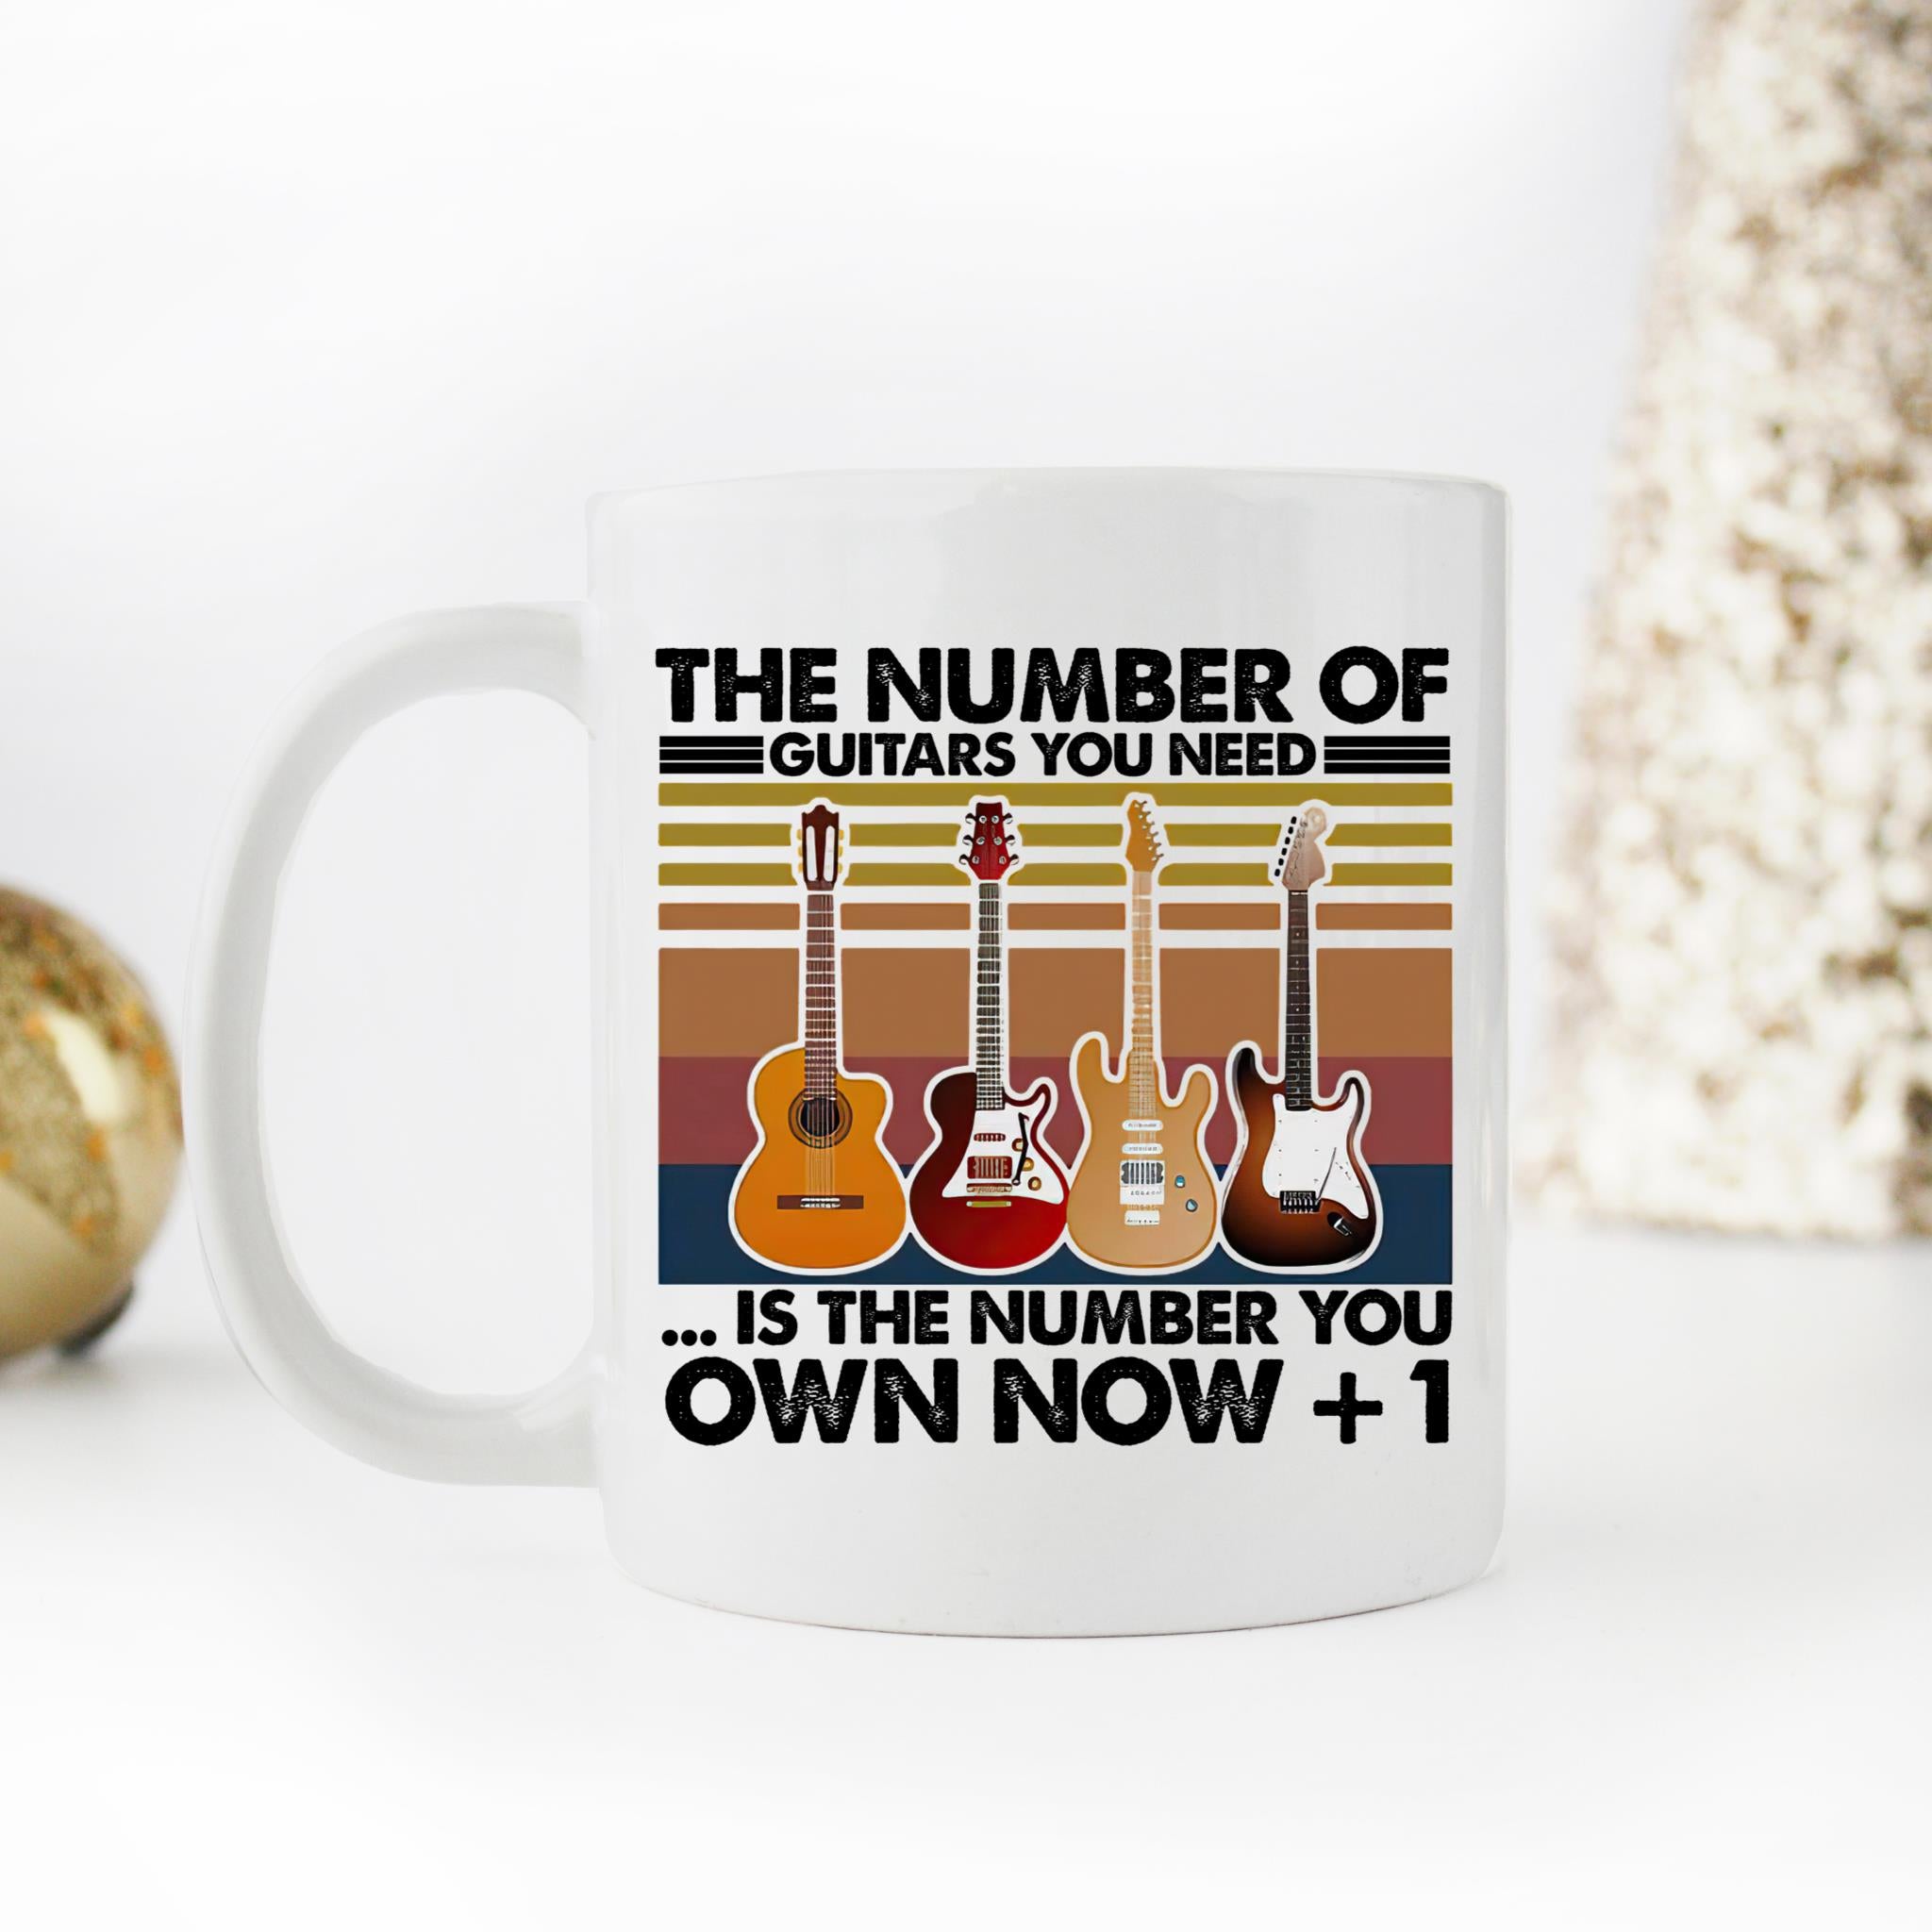 Skitongifts Coffee Mug Funny Ceramic Novelty Music Enthusiast - Inchthe Number Of Guitars You Need Is The Number You Own Now + 1 TsZIoZQ